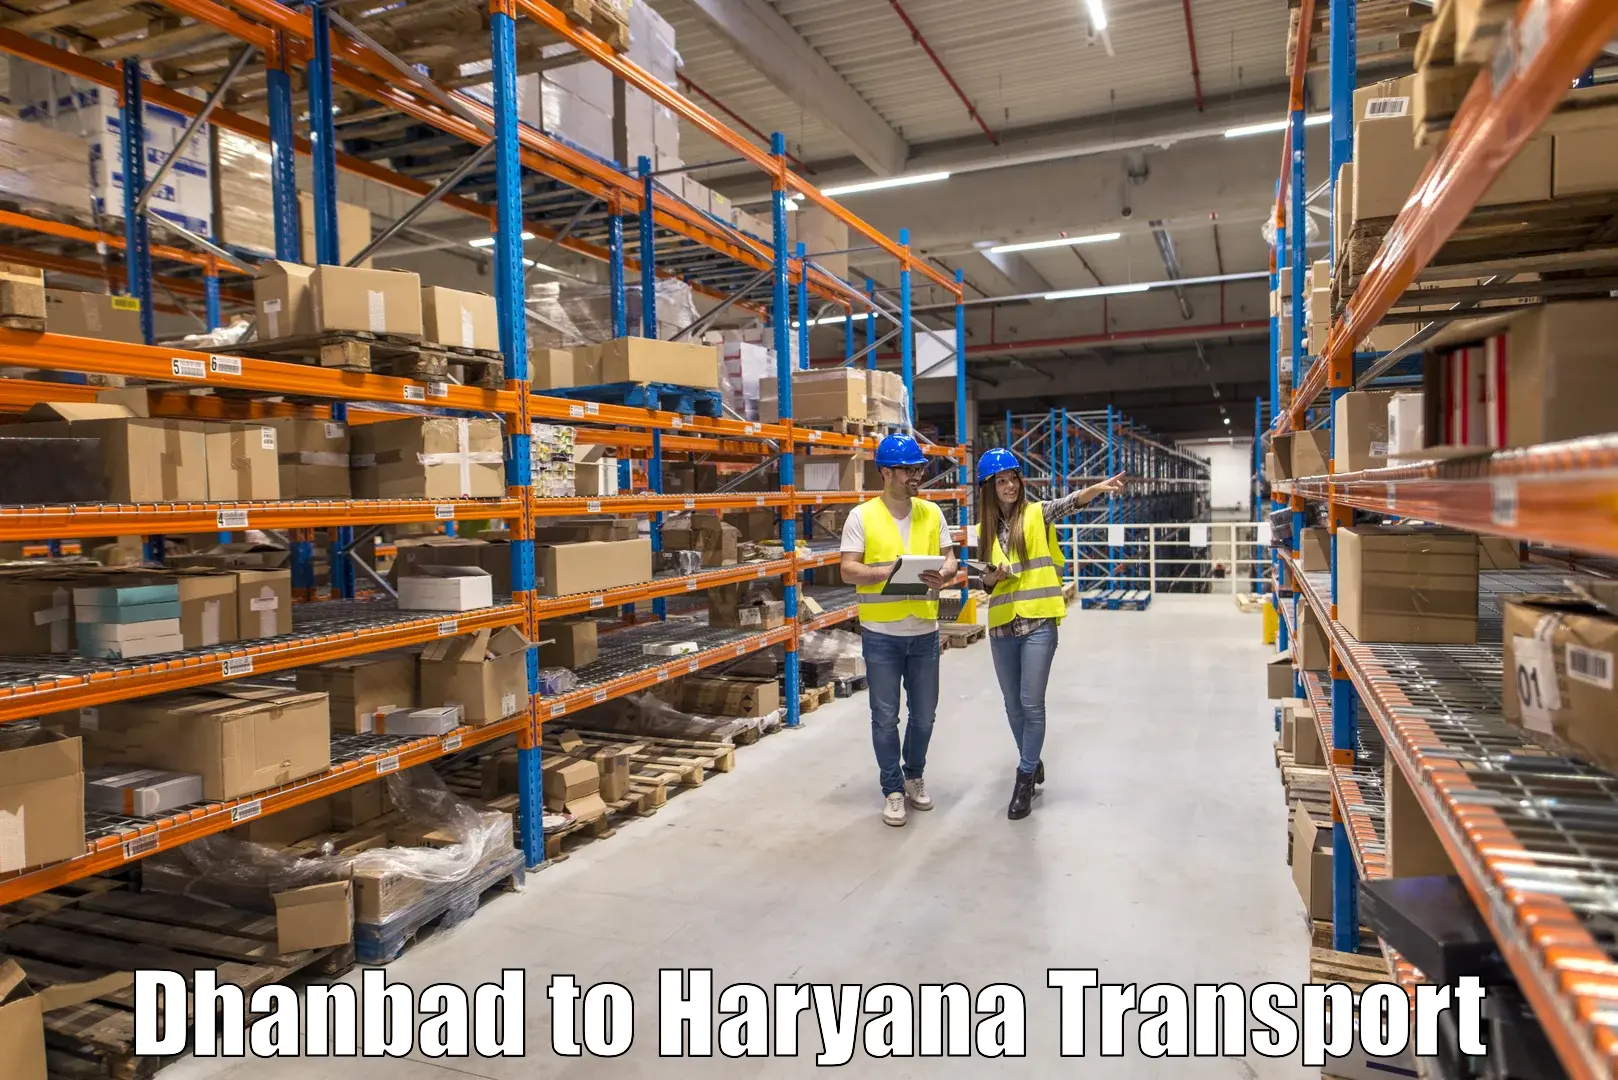 India truck logistics services Dhanbad to Assandh